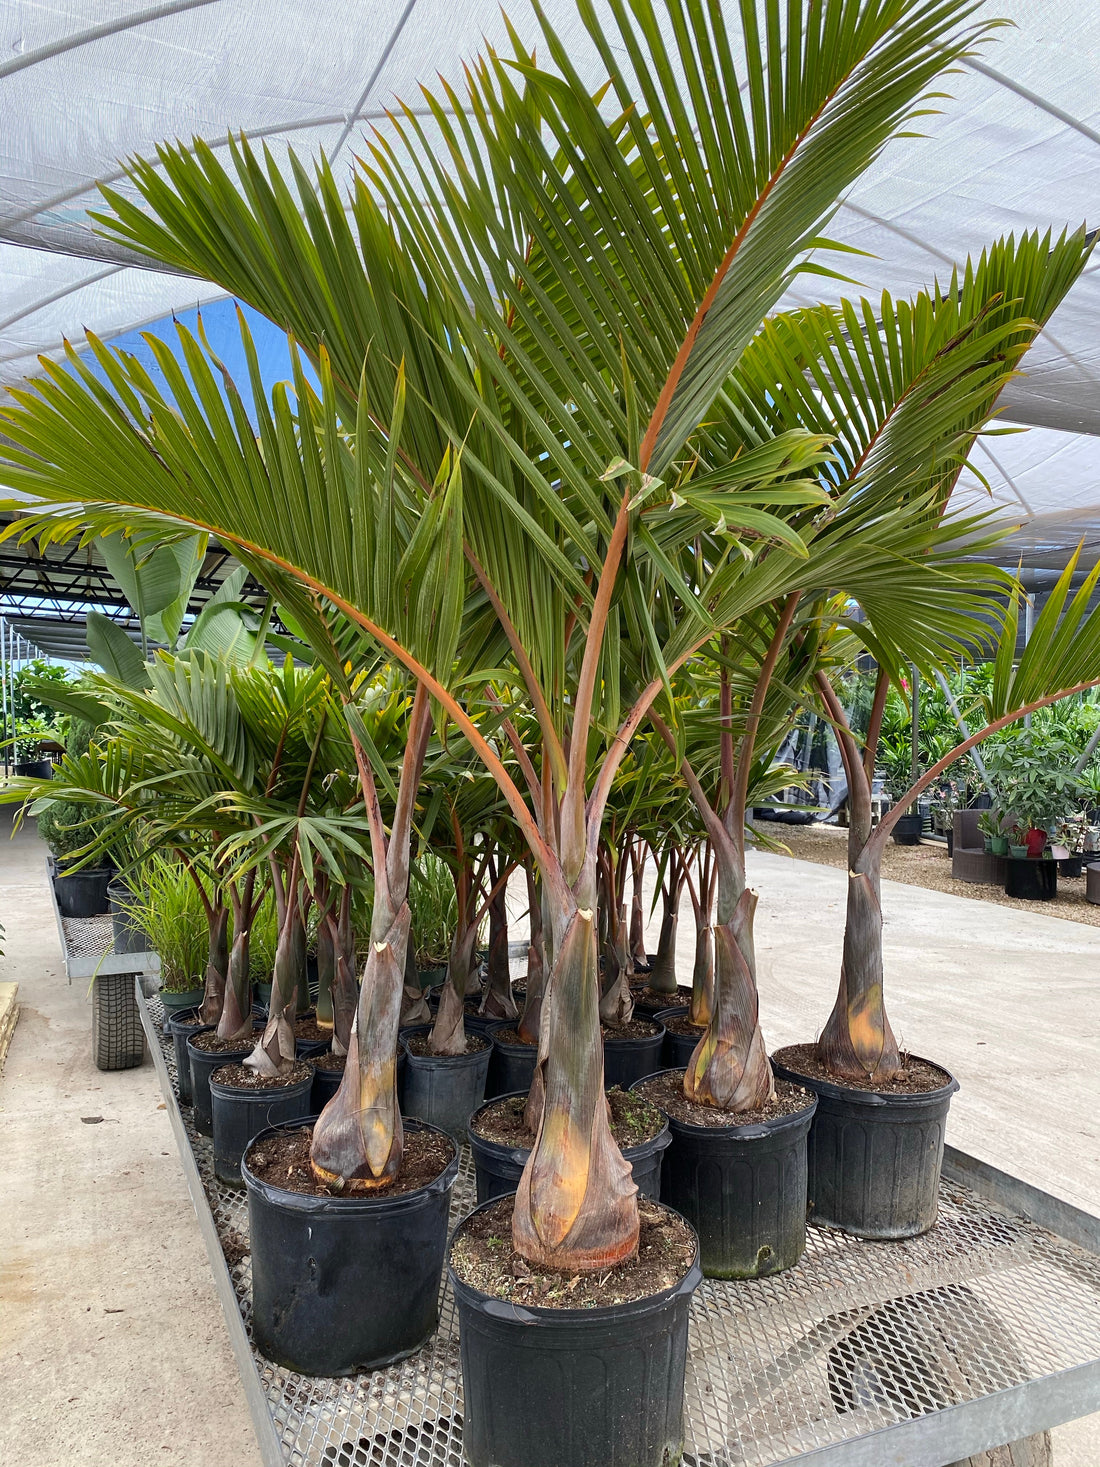 Triangle Palm, Dypsis Decaryi